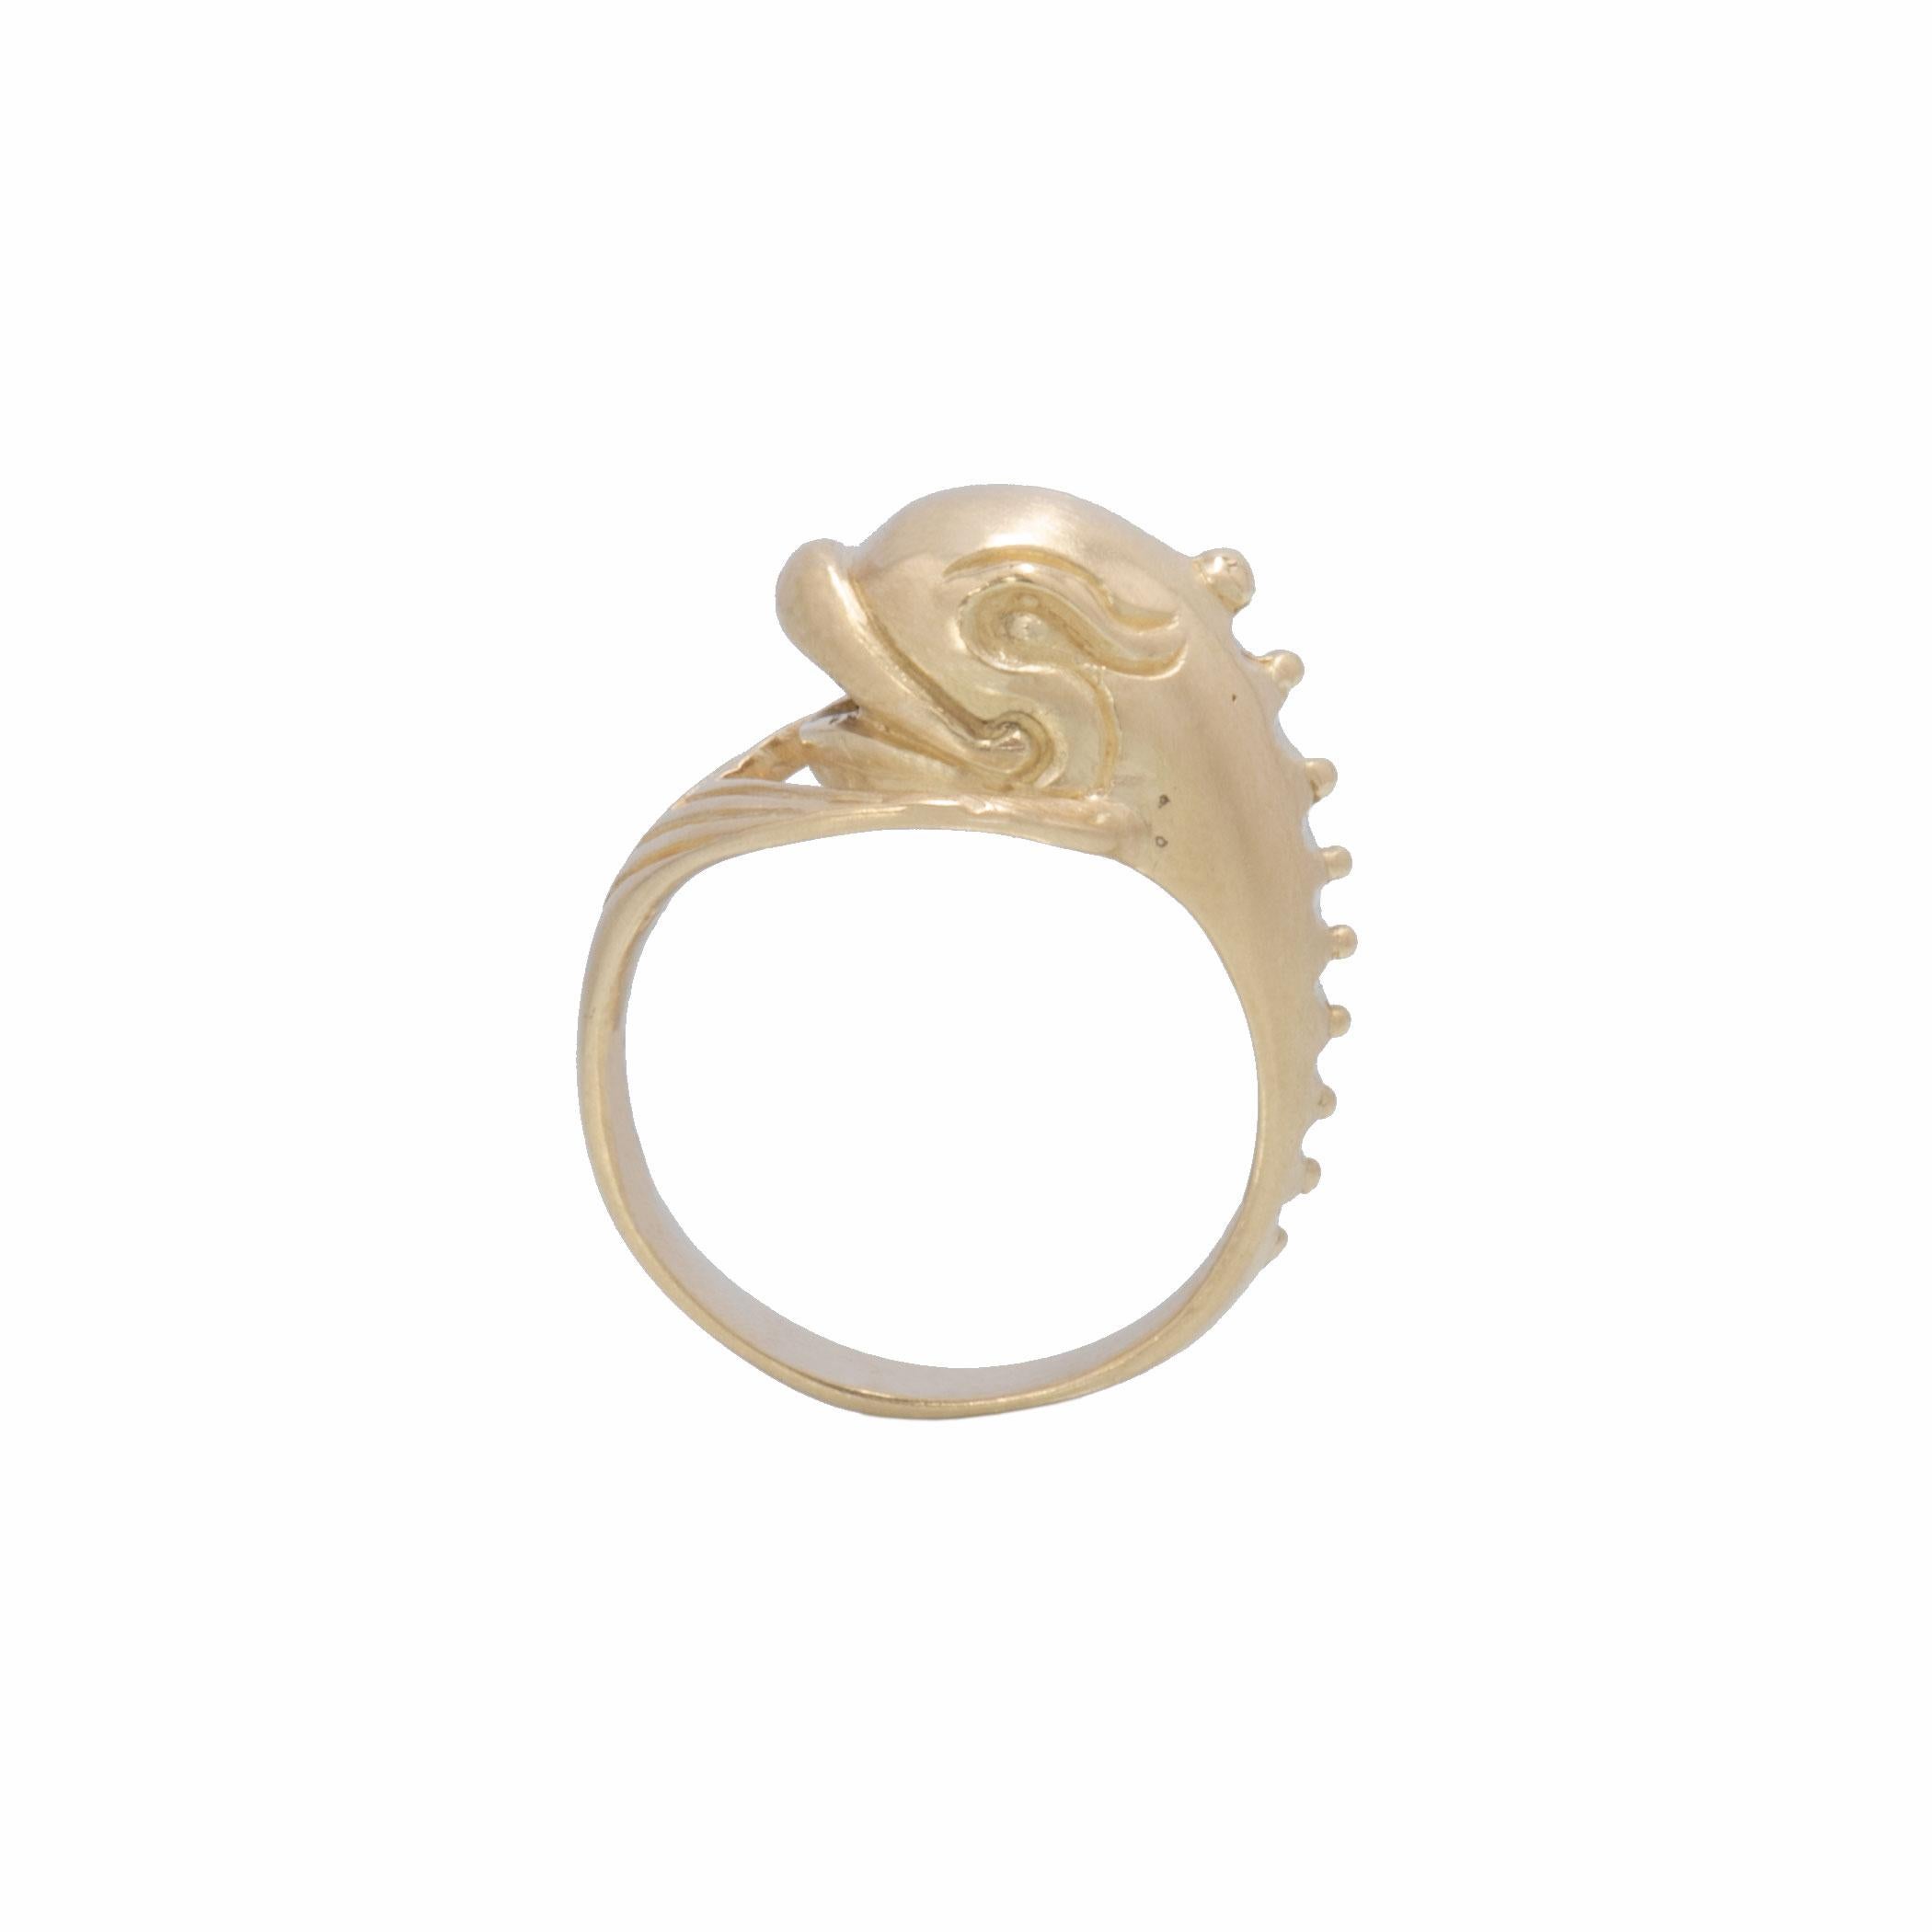 Dolphin Ring in 18 Karat Gold In New Condition For Sale In Santa Fe, NM